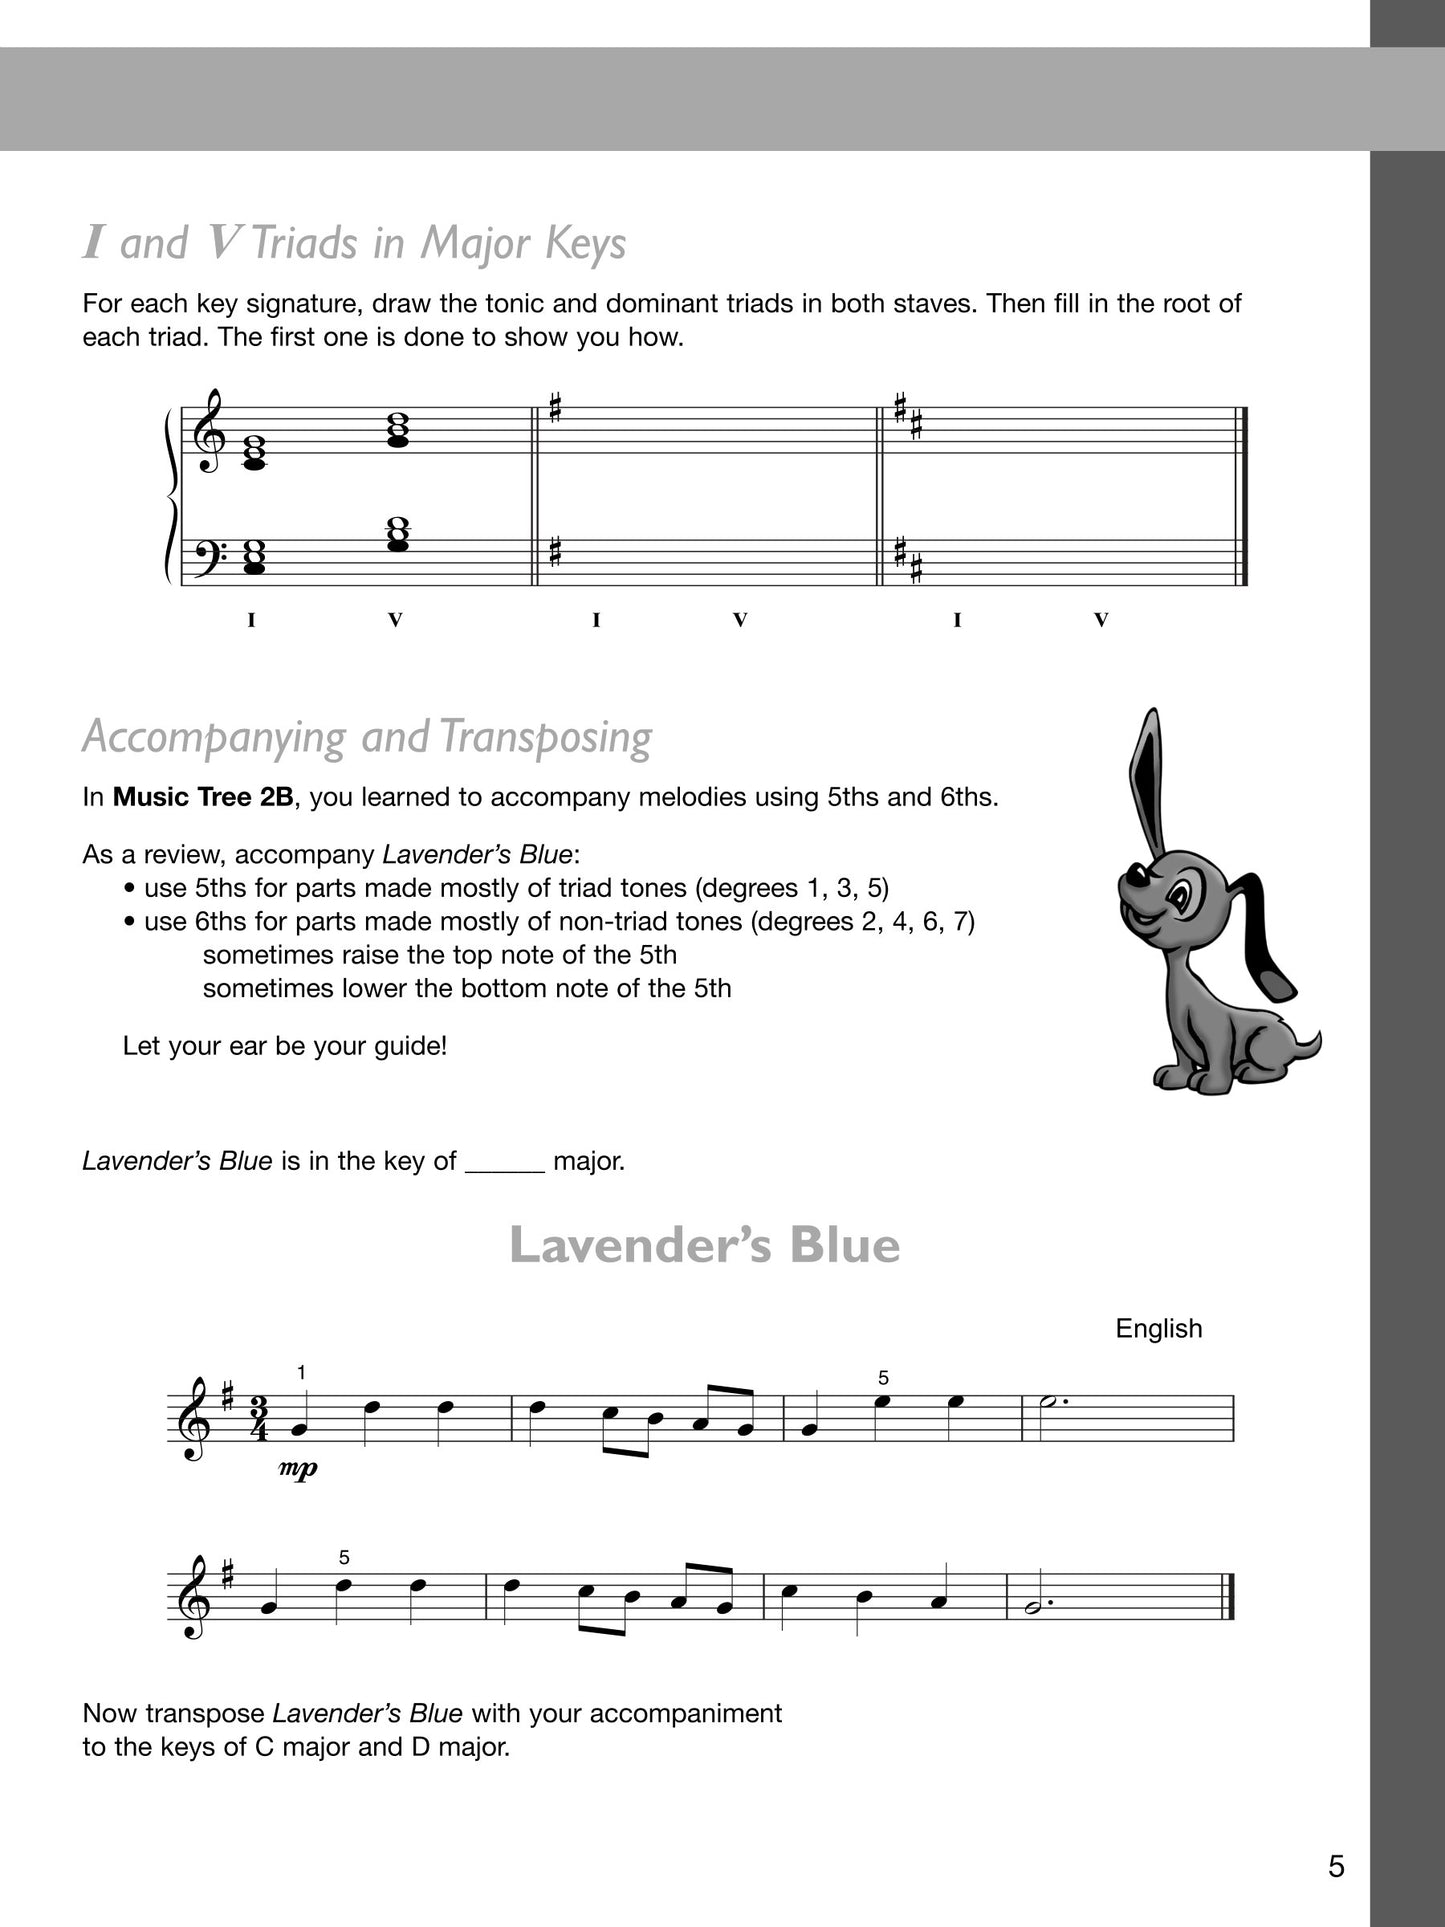 The Music Tree - Part 3 Activities Book